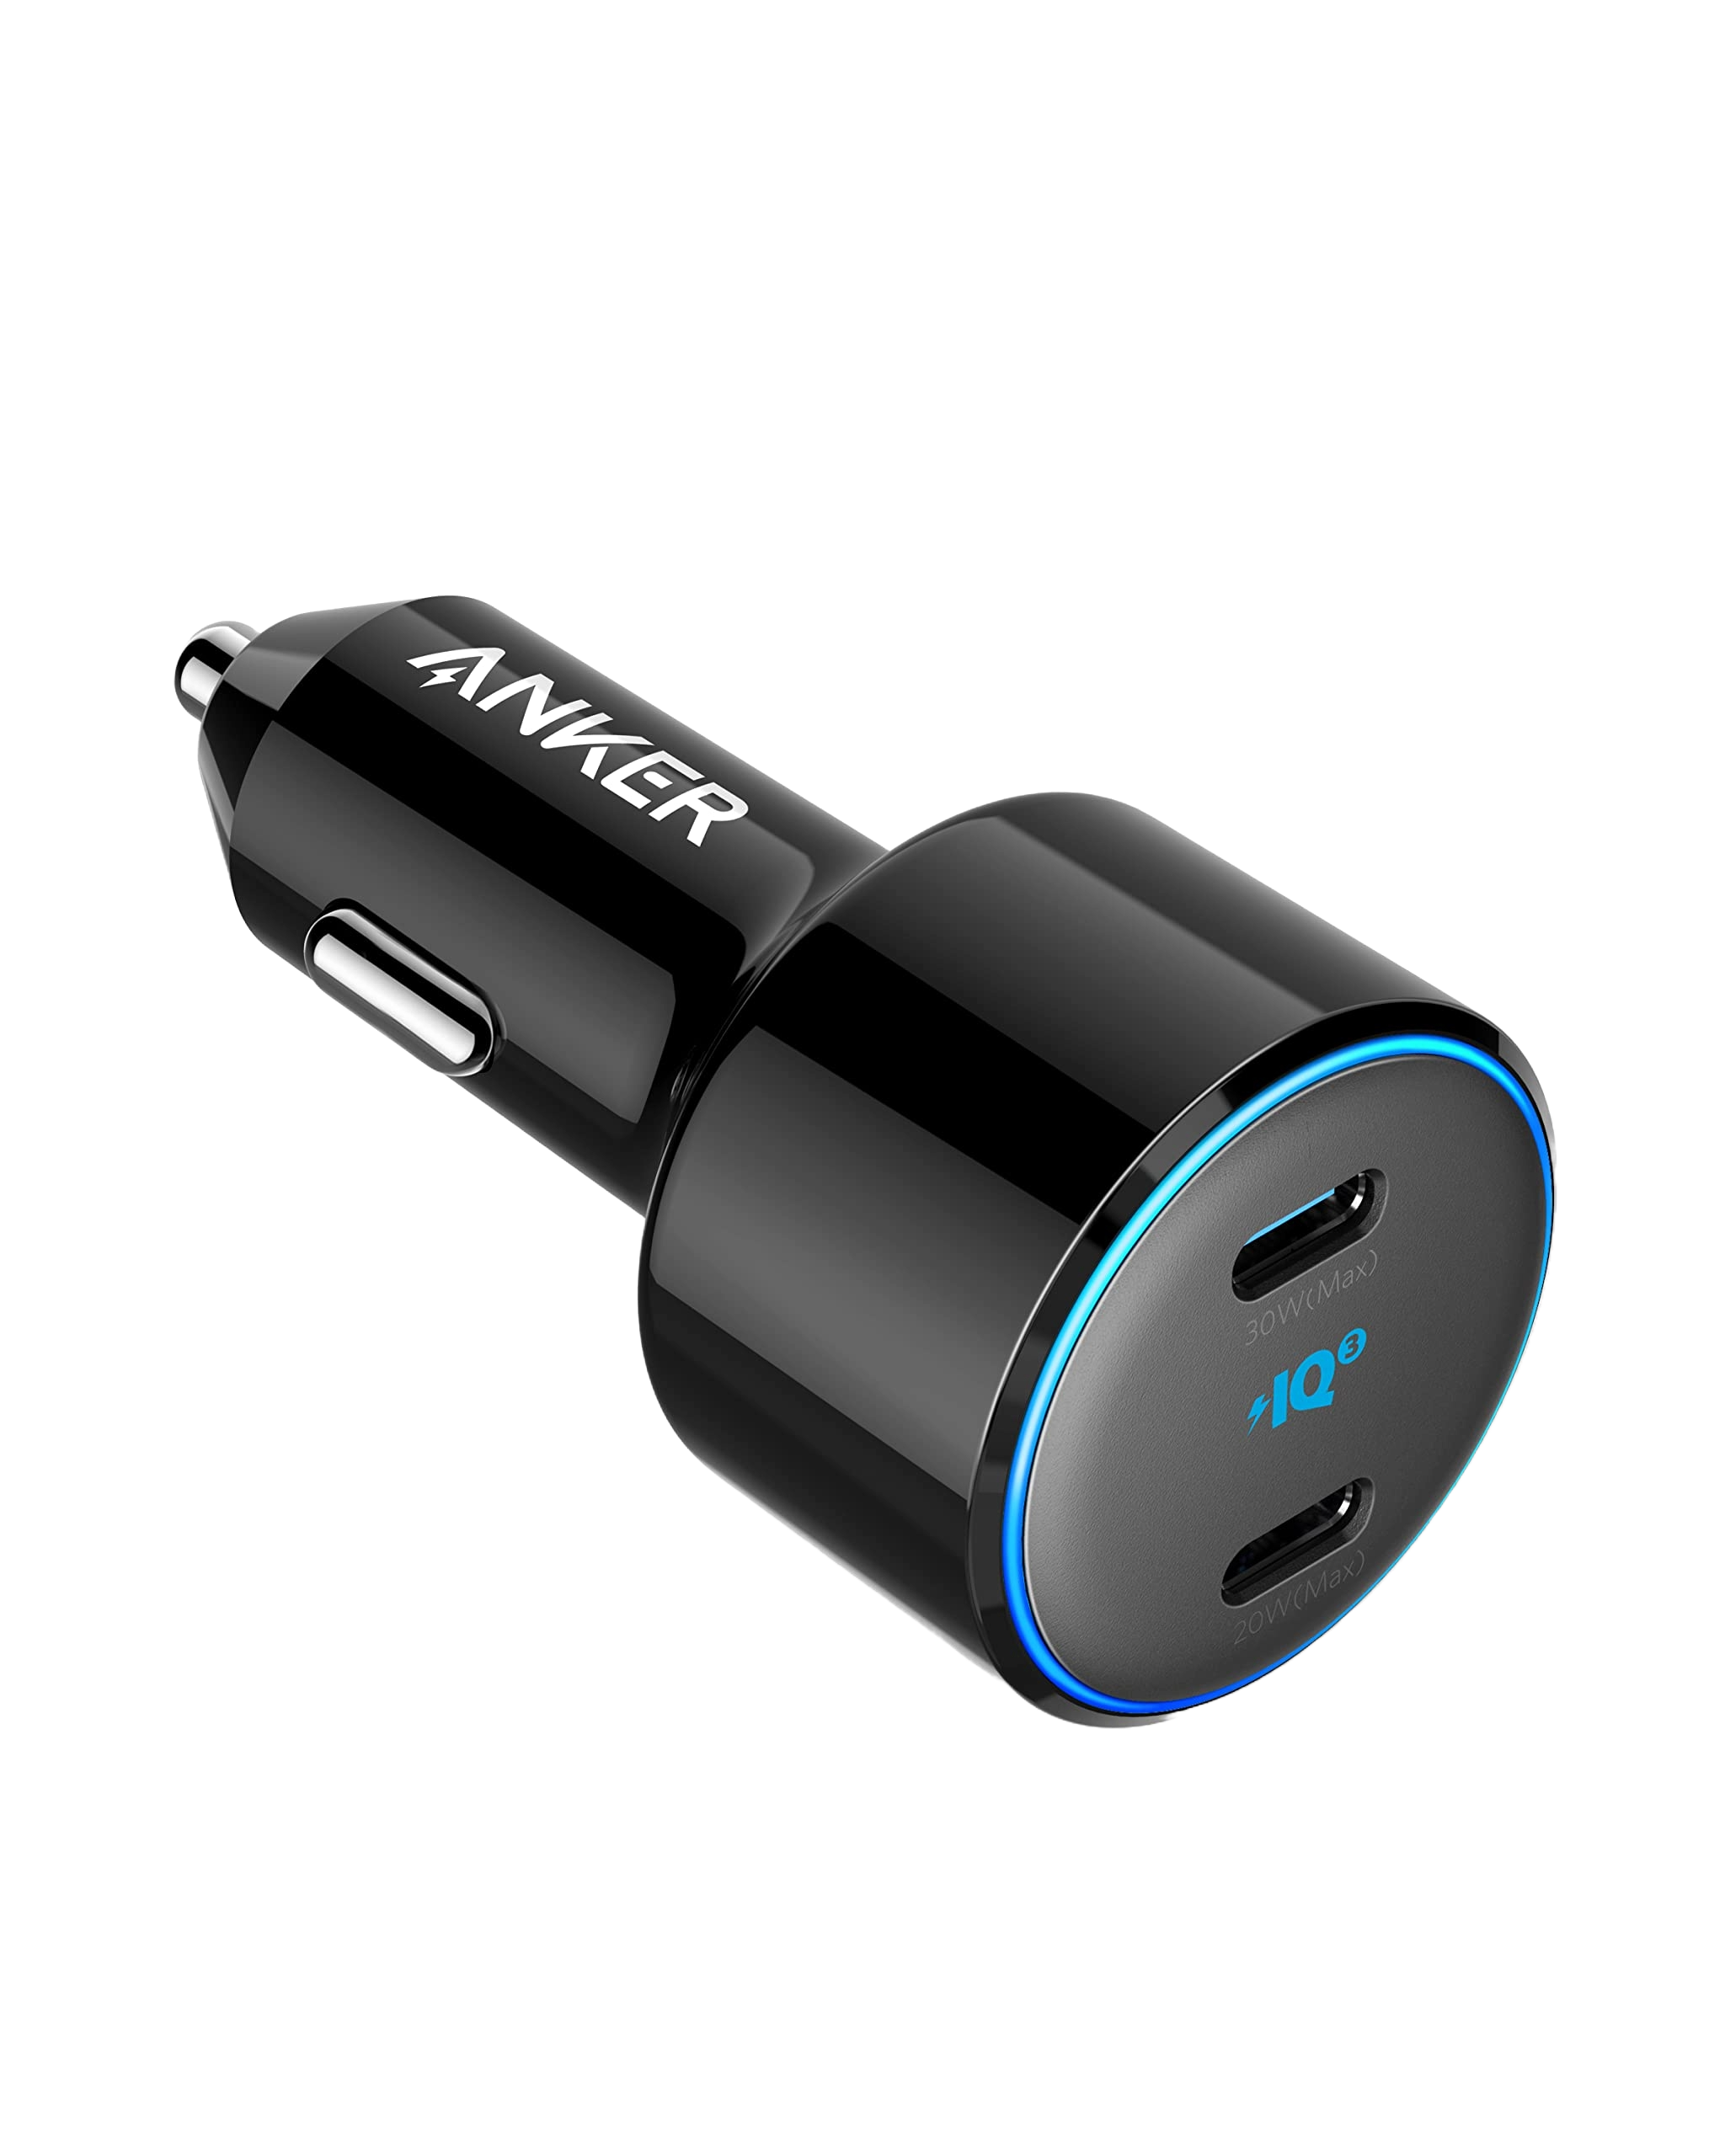 Anker MagSafe Car Mount debuts as latest PowerWave release - 9to5Toys